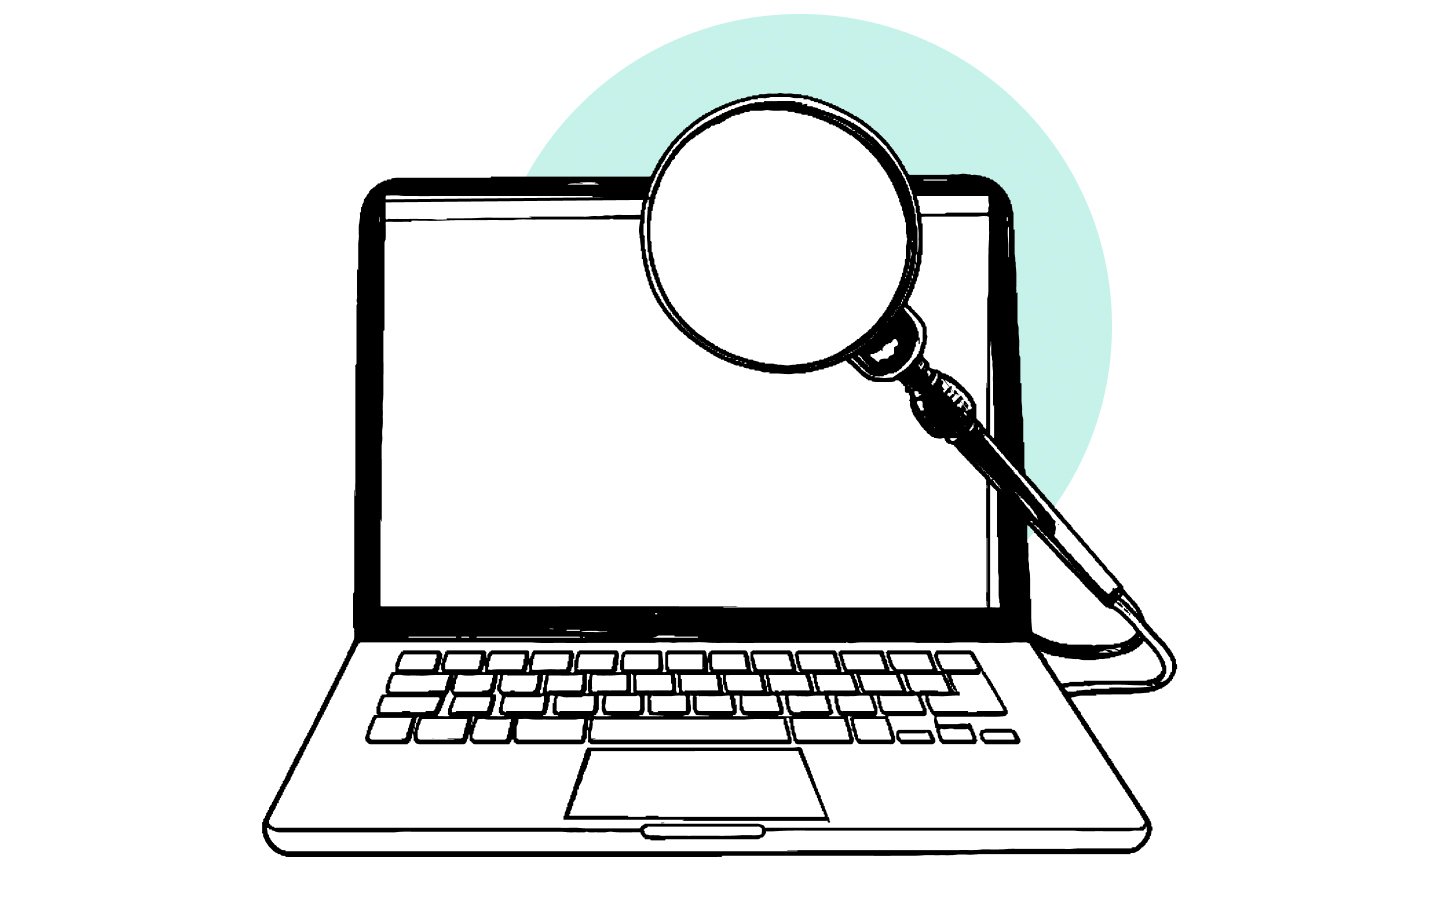 B2B seo strategy for brand visibility - image of a laptop and magnifying glass